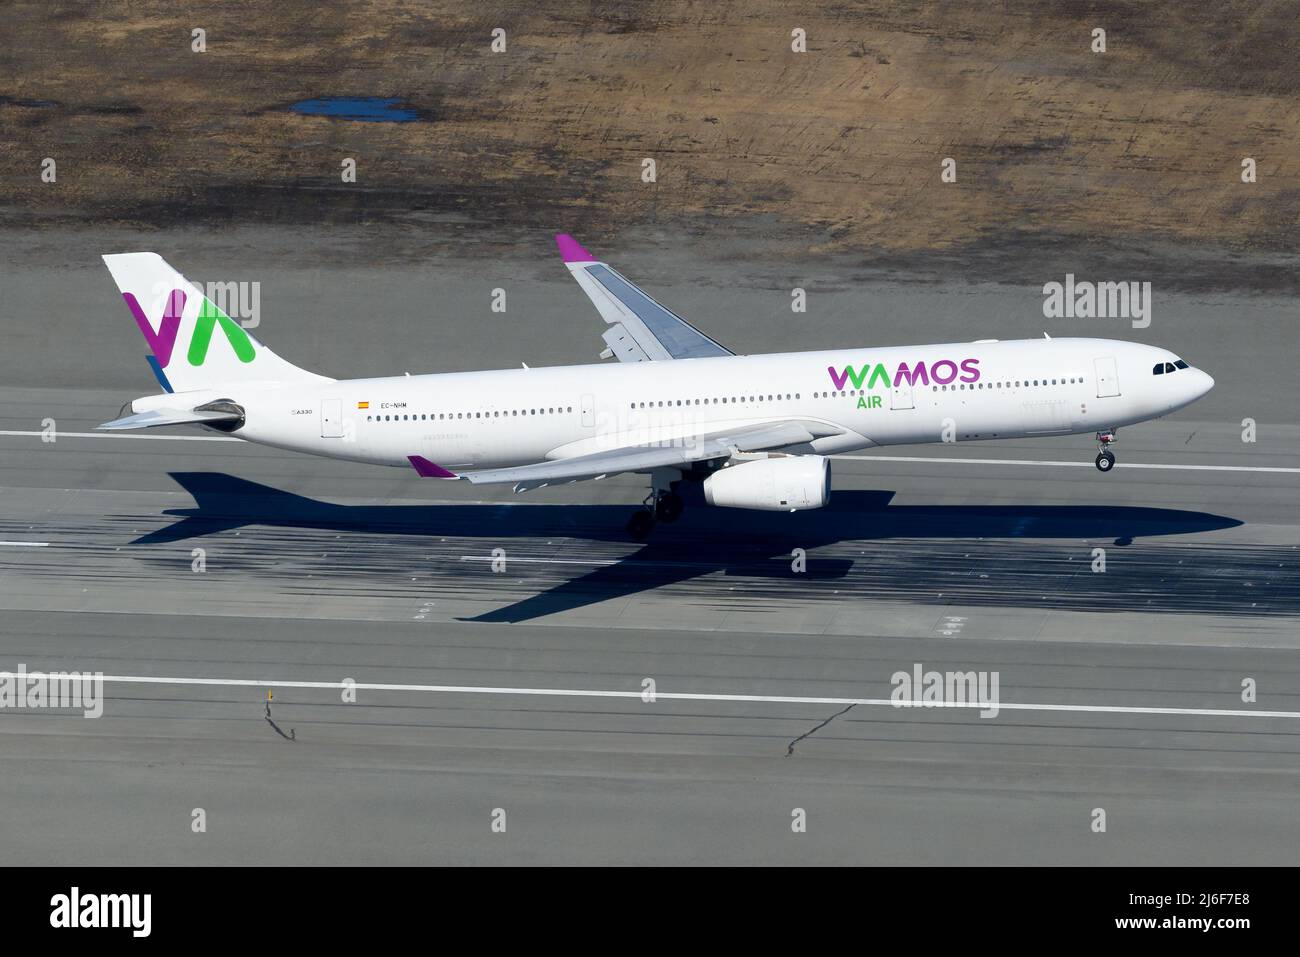 Wamos Air Airbus A330-300 plane landing. Aircraft A330 of charter airline WamosAir. Airplane registered as EC-NHM. Stock Photo